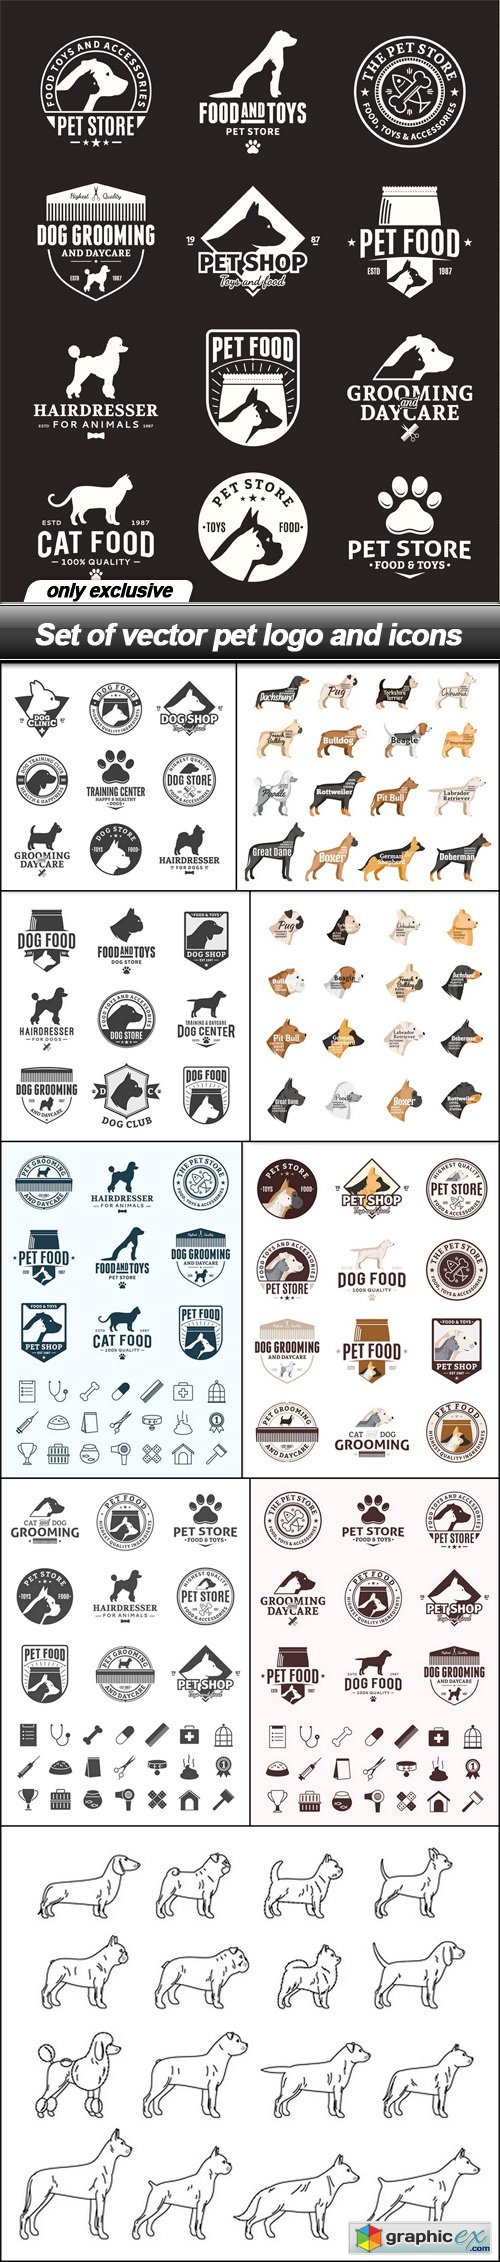 Set of vector pet logo and icons - 10 EPS